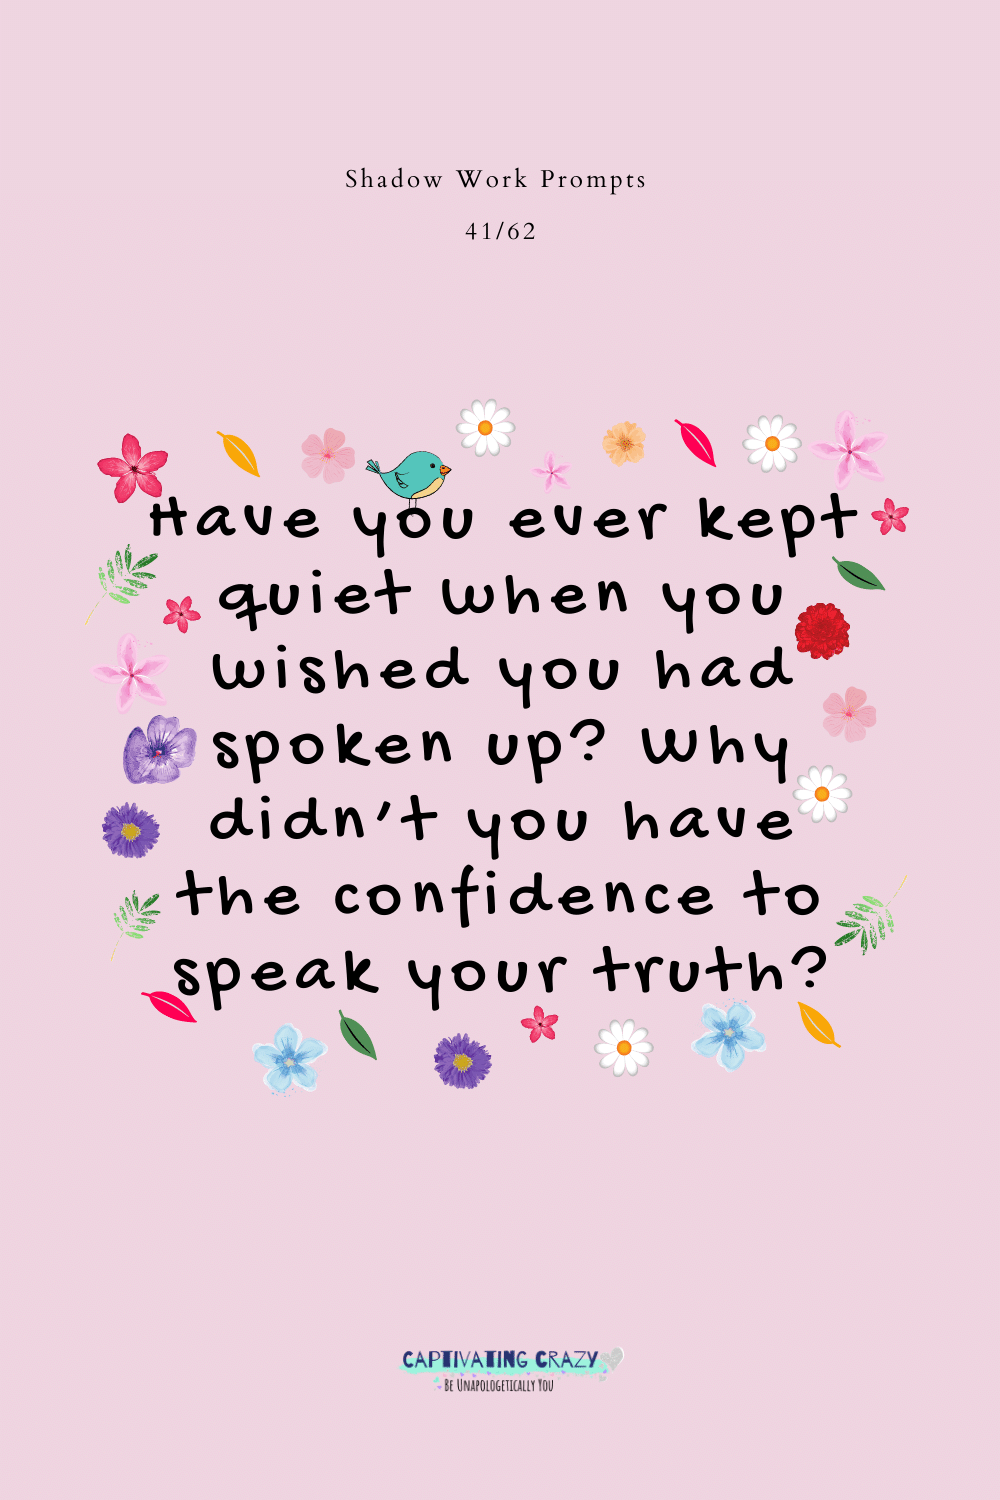 Have you ever kept quiet when you wished you had spoken up? Why didn't you have the confidence to speak your truth?